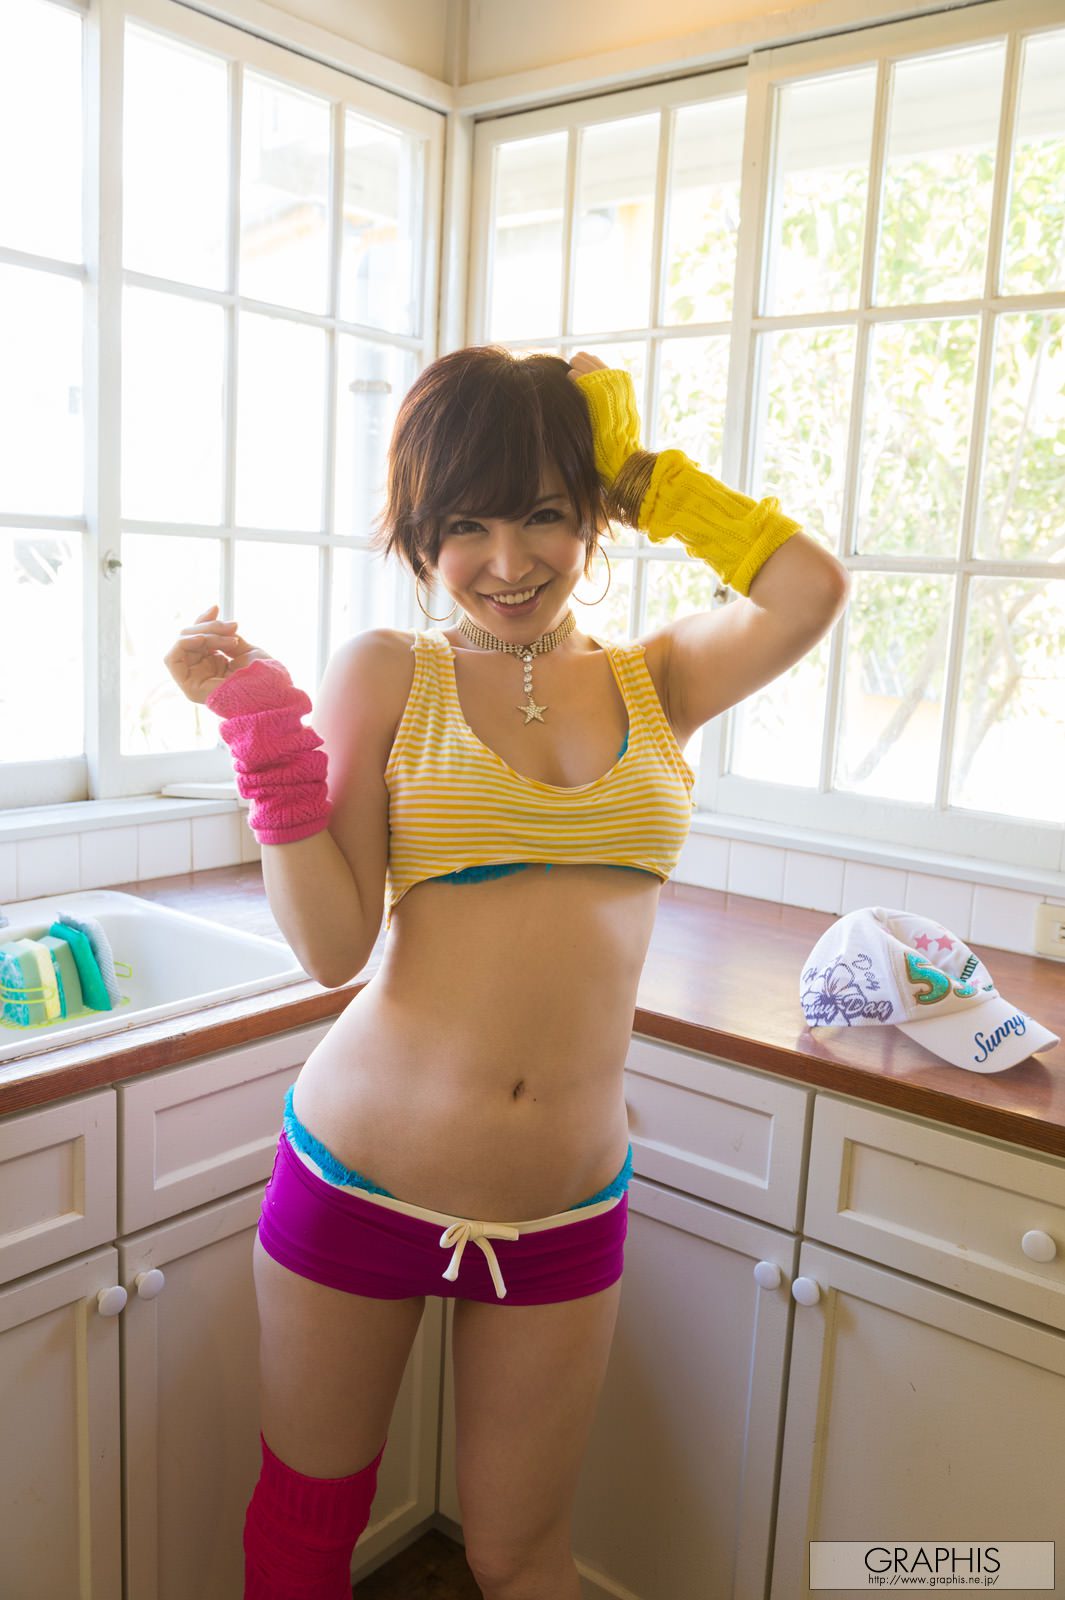 yuria-satomi-colorful-outfit-nude-graphis-01